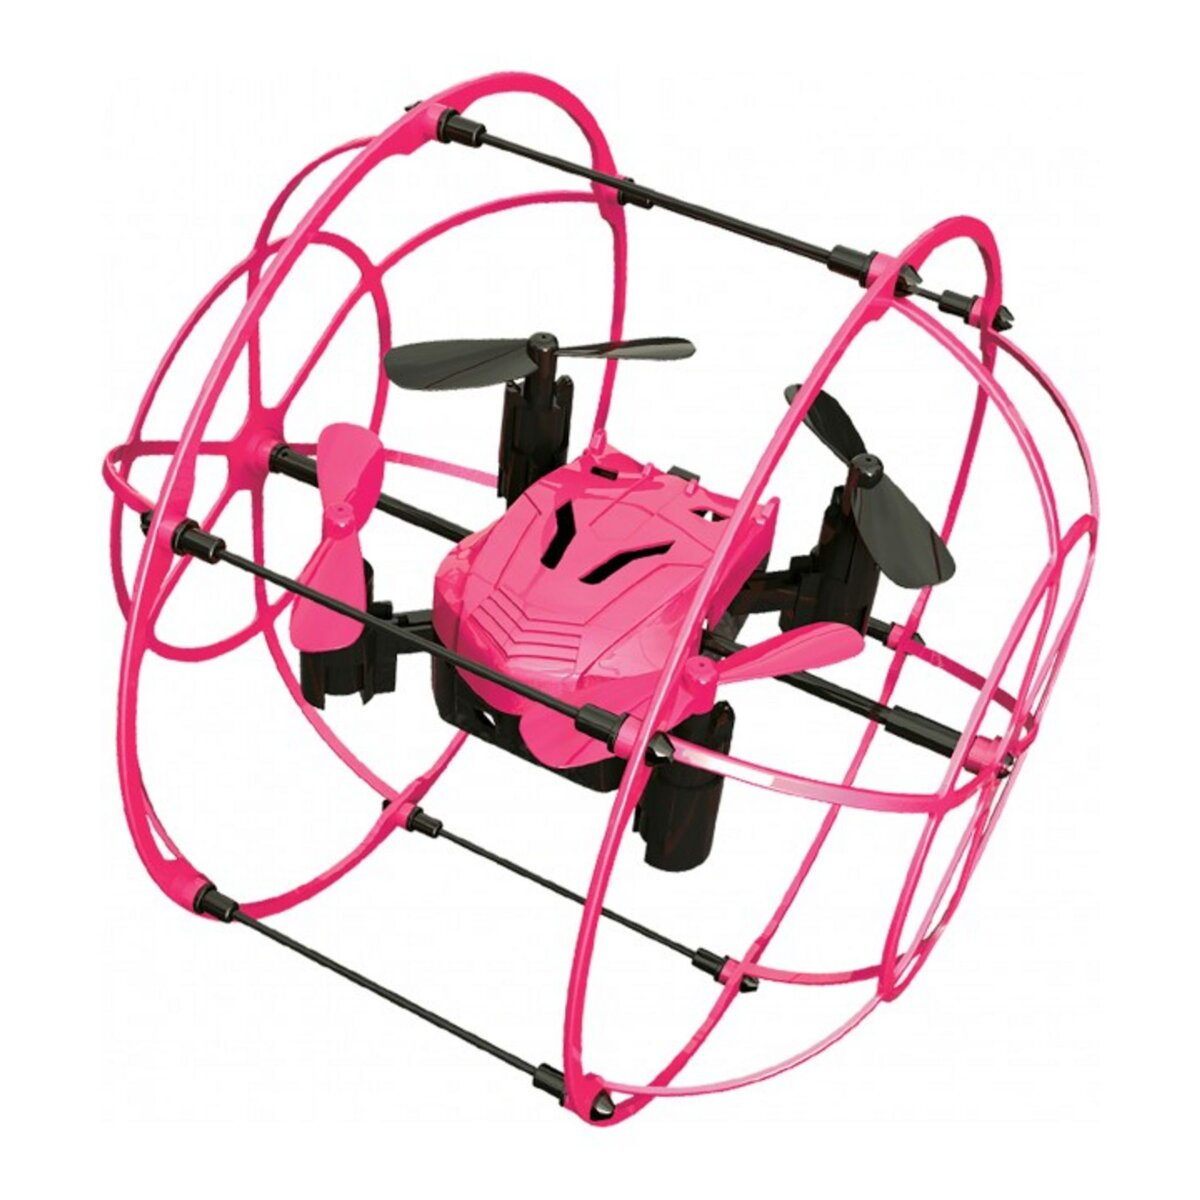 Irdrone Roller drone rose 